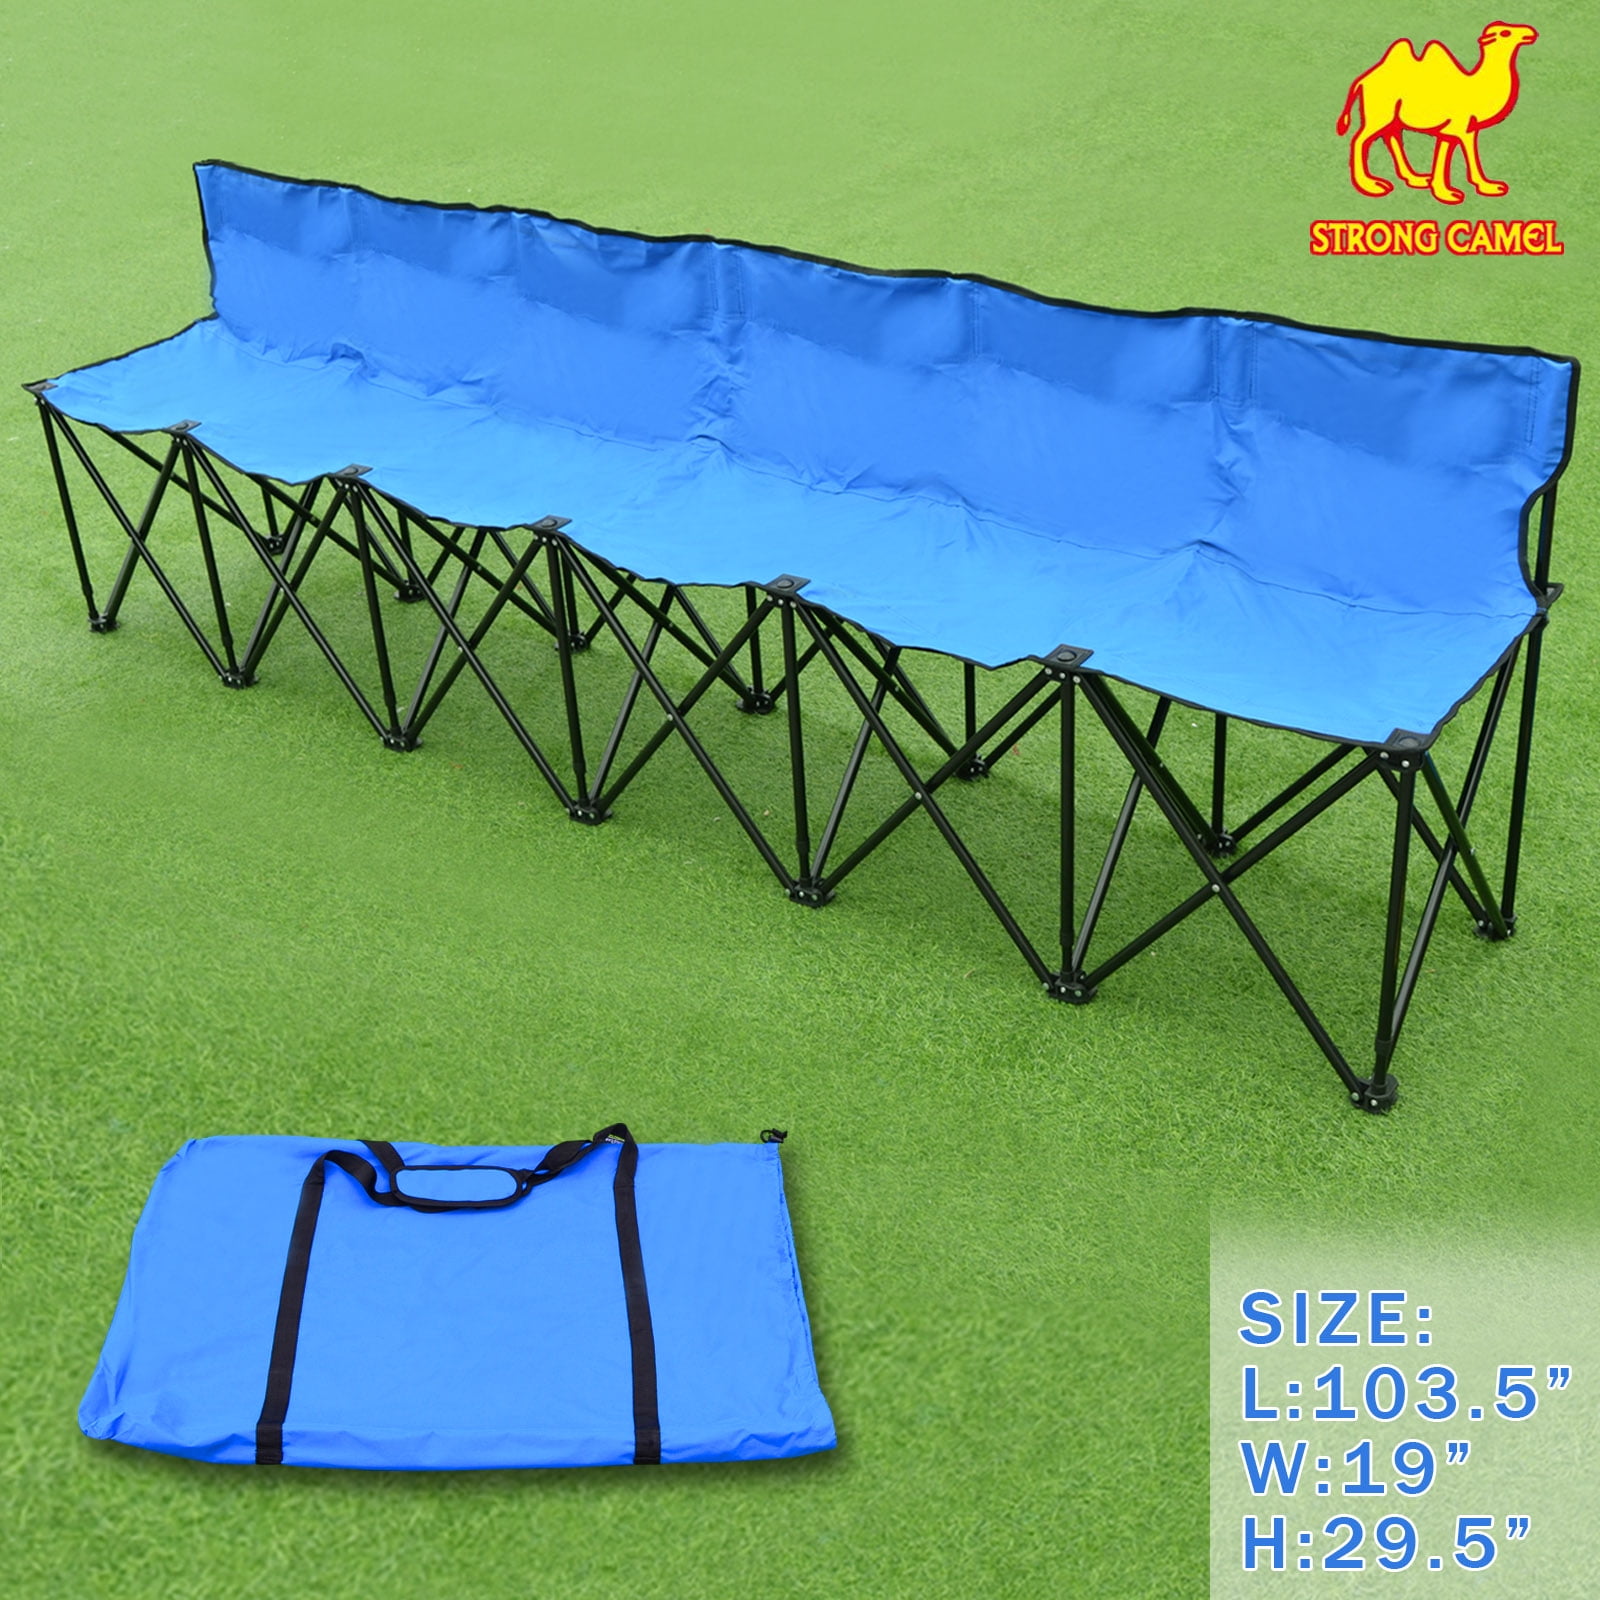 6seater Blue Portable Folding Bench Sport Sideline Chair Seat With Carry Bag for sale online 